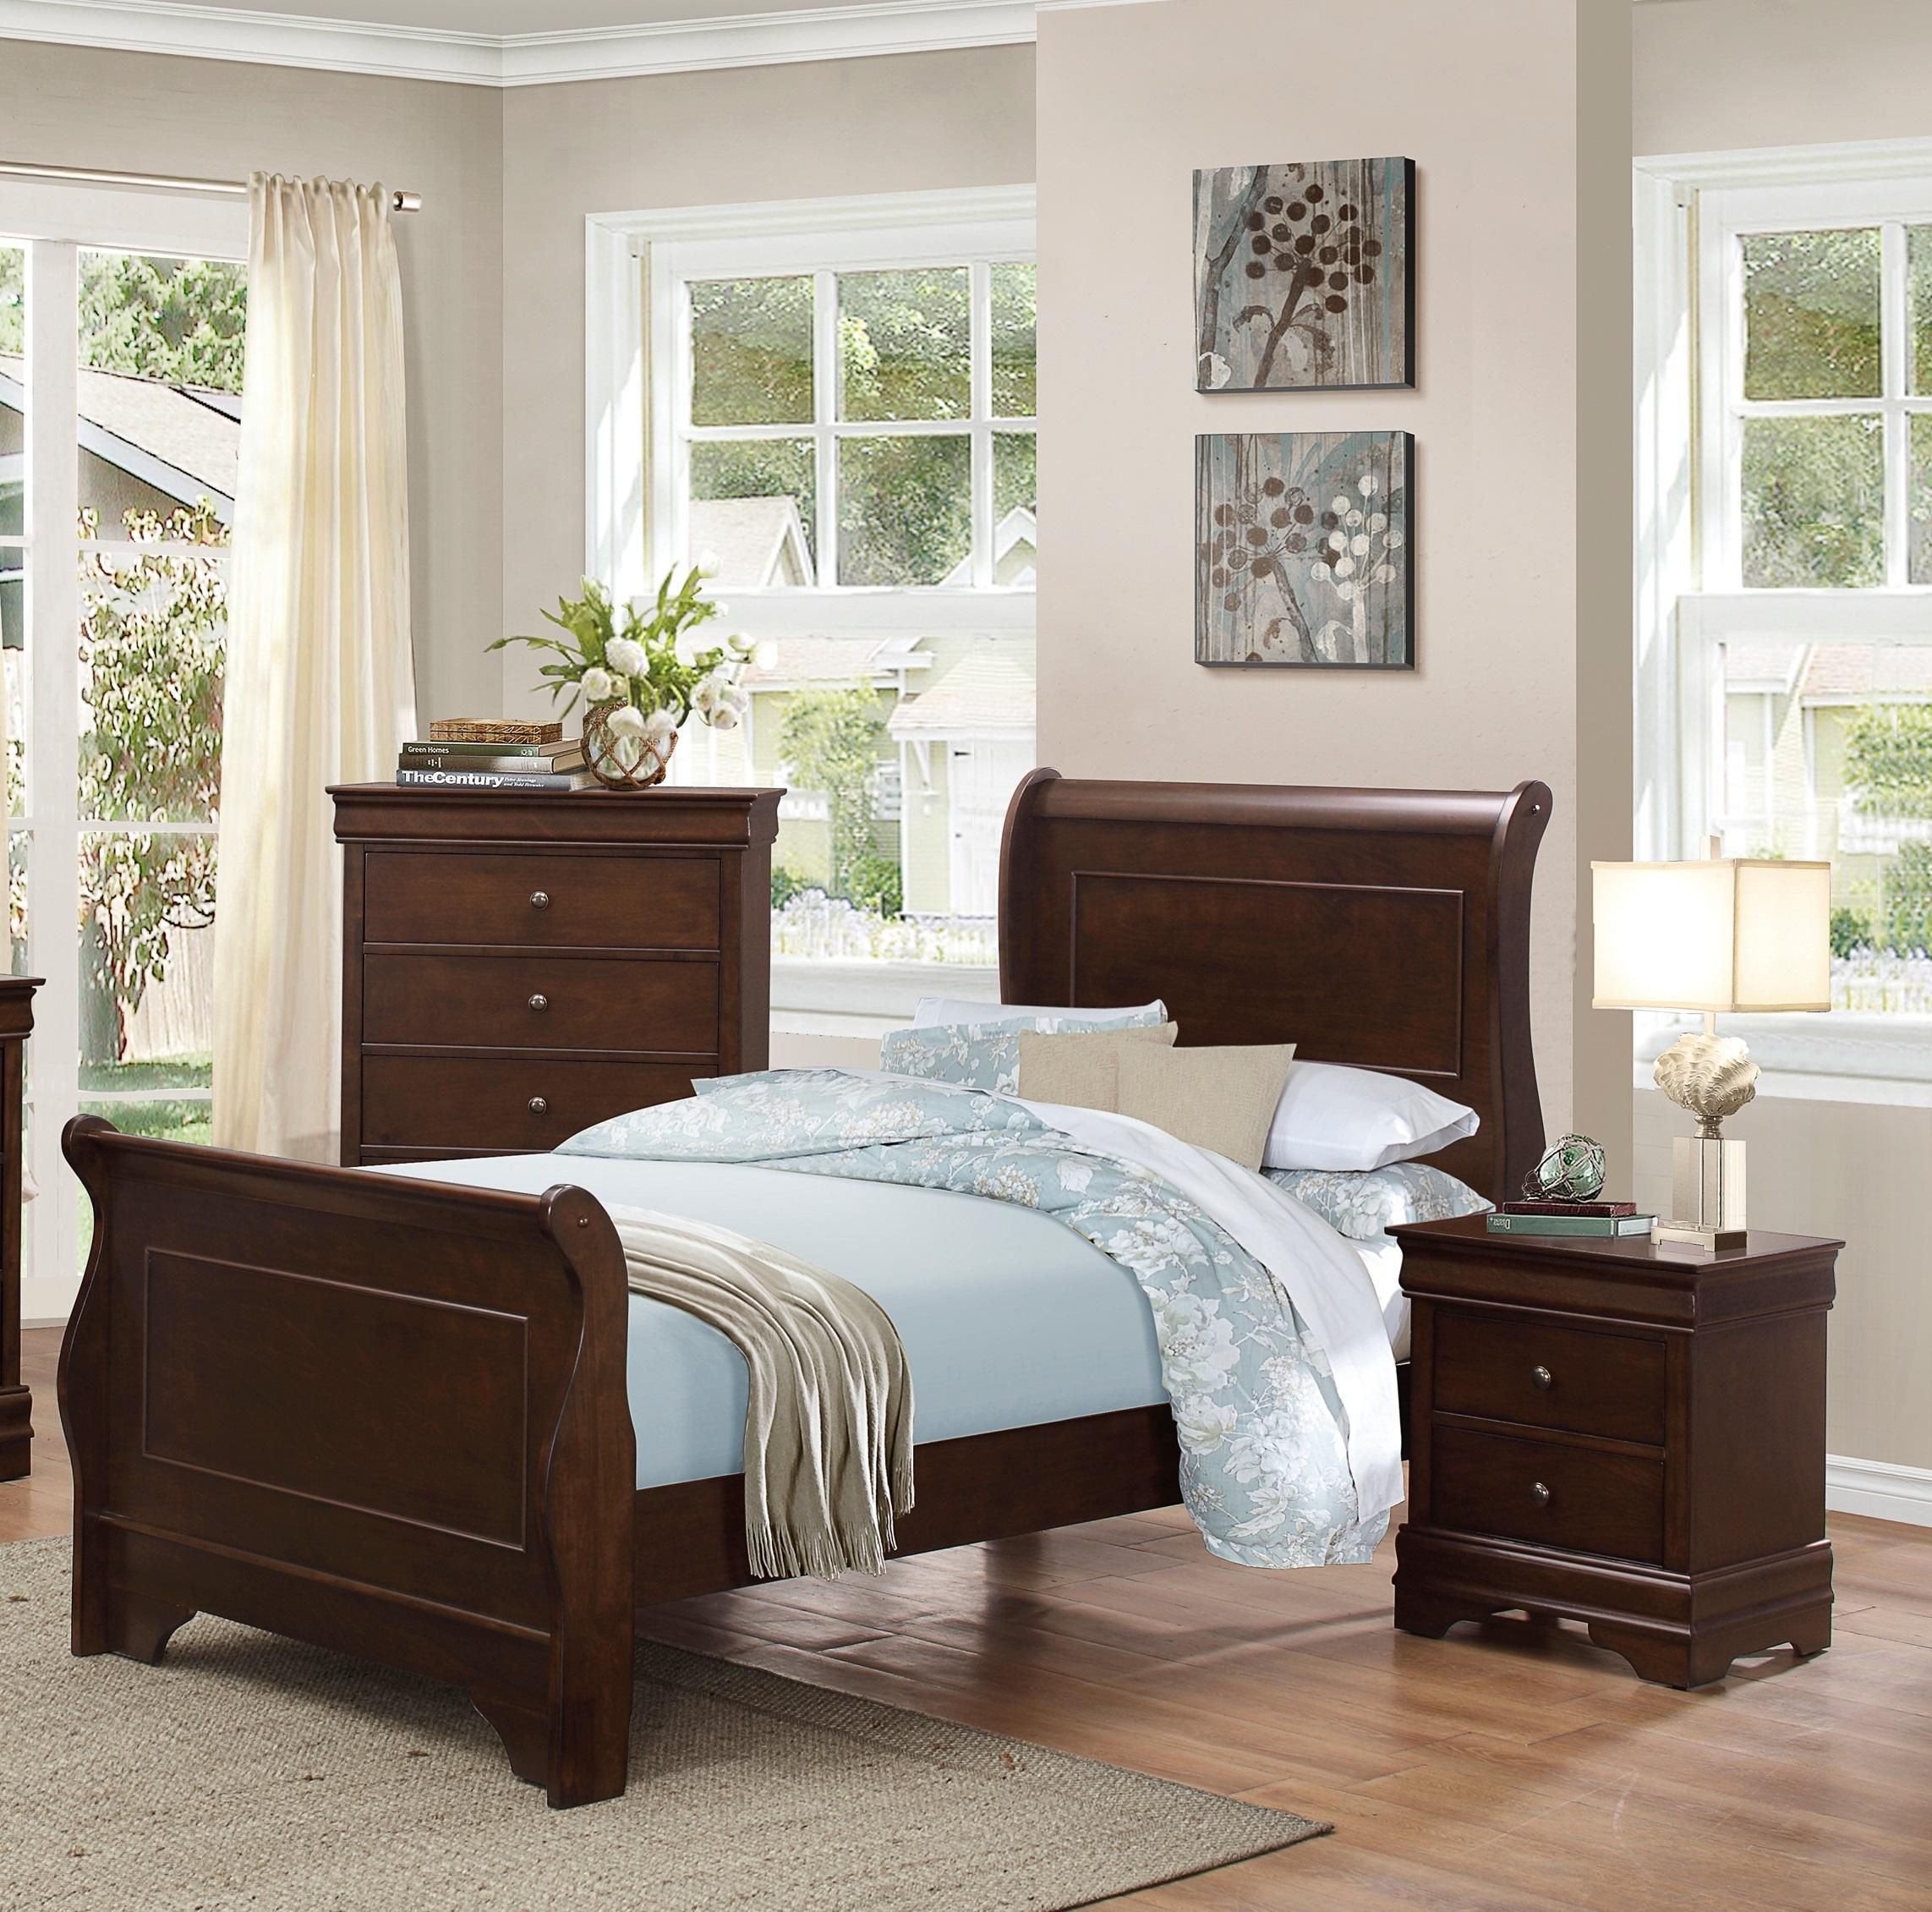 Modern Bedroom Set 1856T-1-3PC Abbeville 1856T-1-3PC in Cherry 